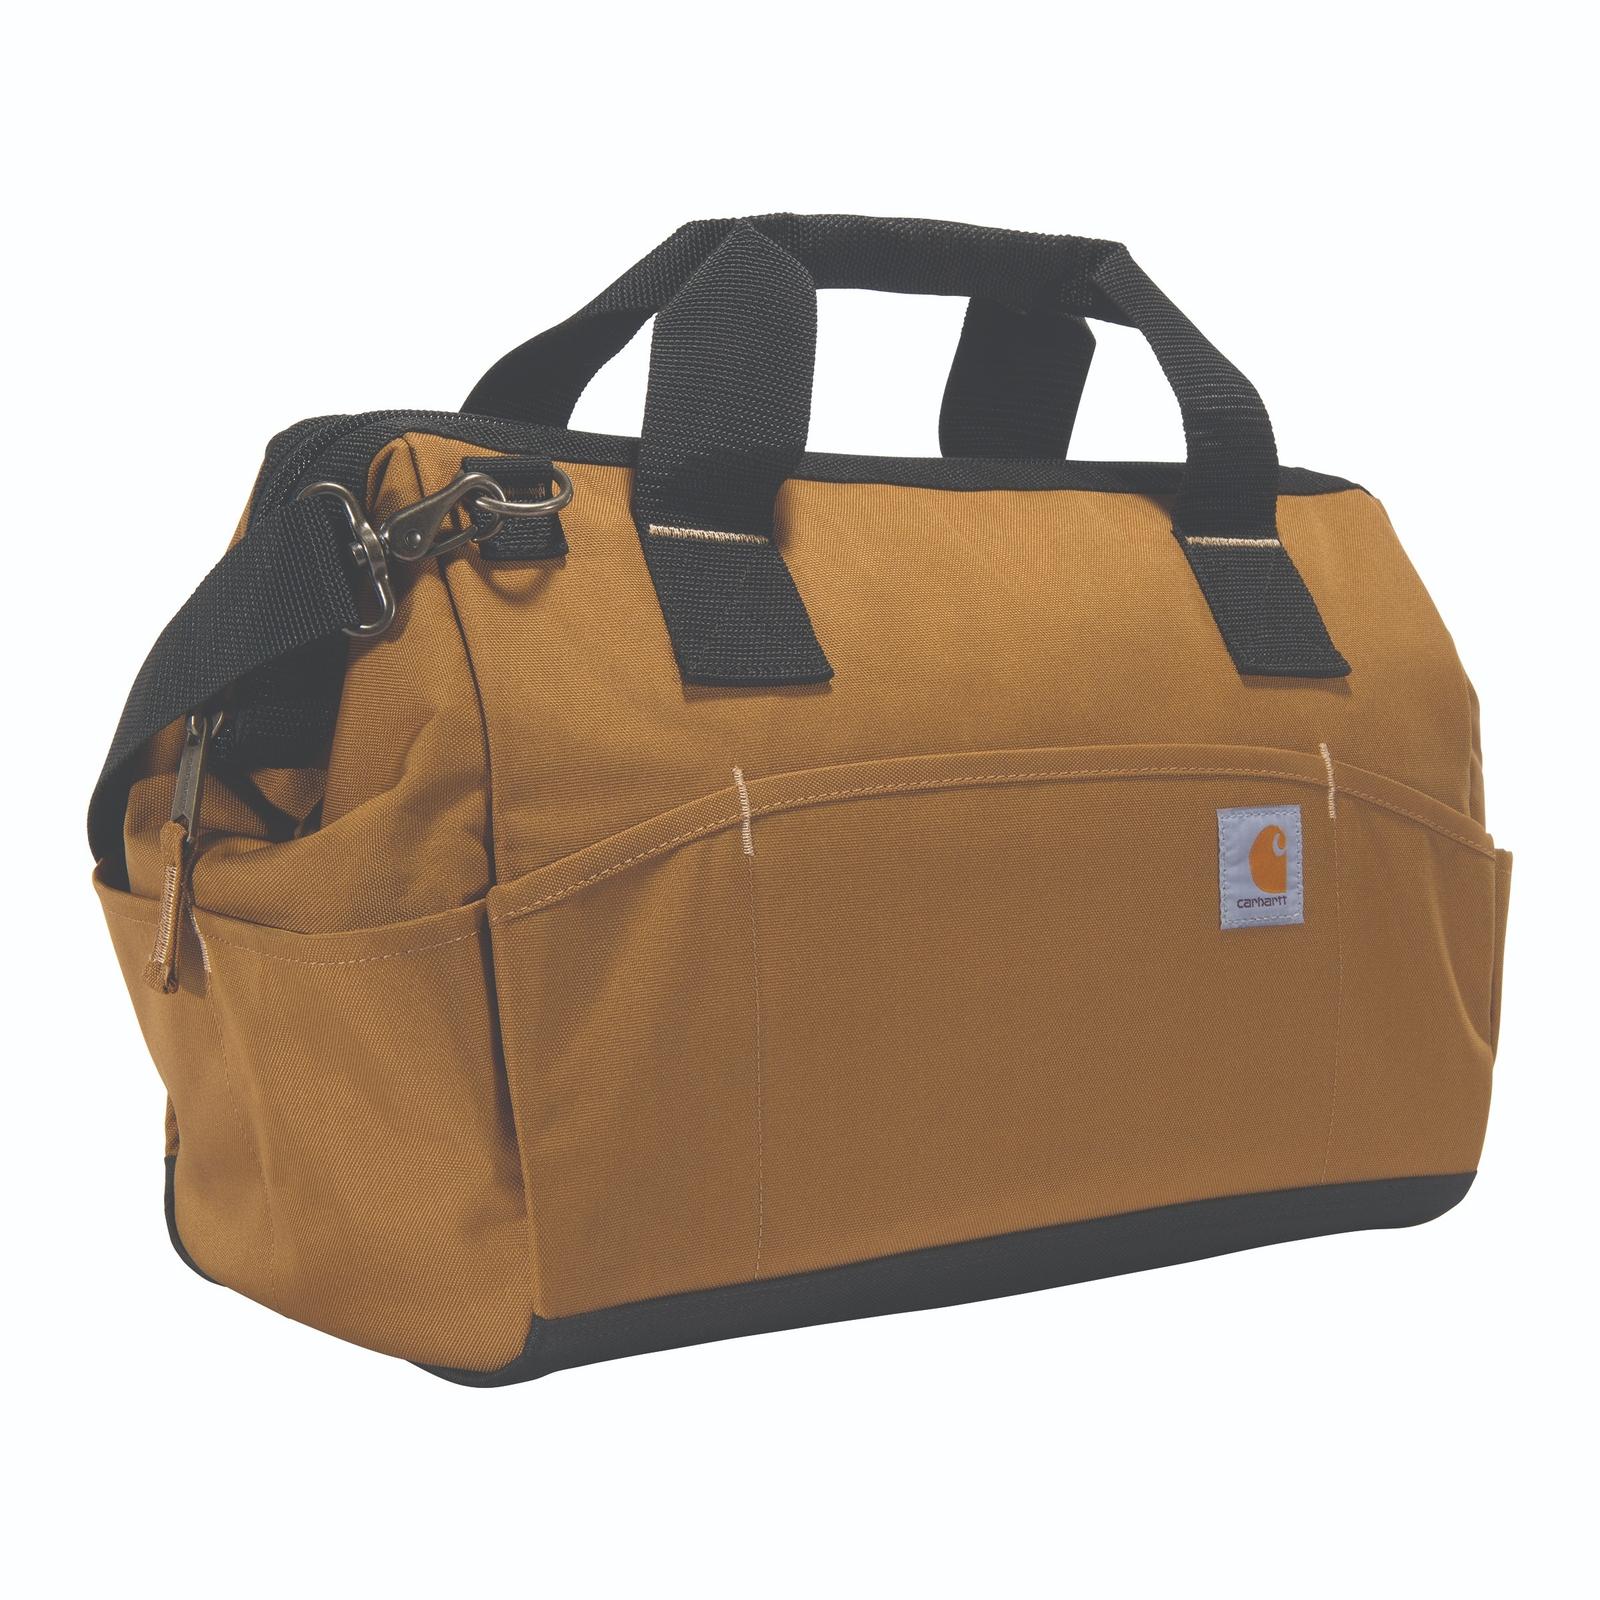 Carhart 16-Inch 17 Pocket Midweight Tool Bag